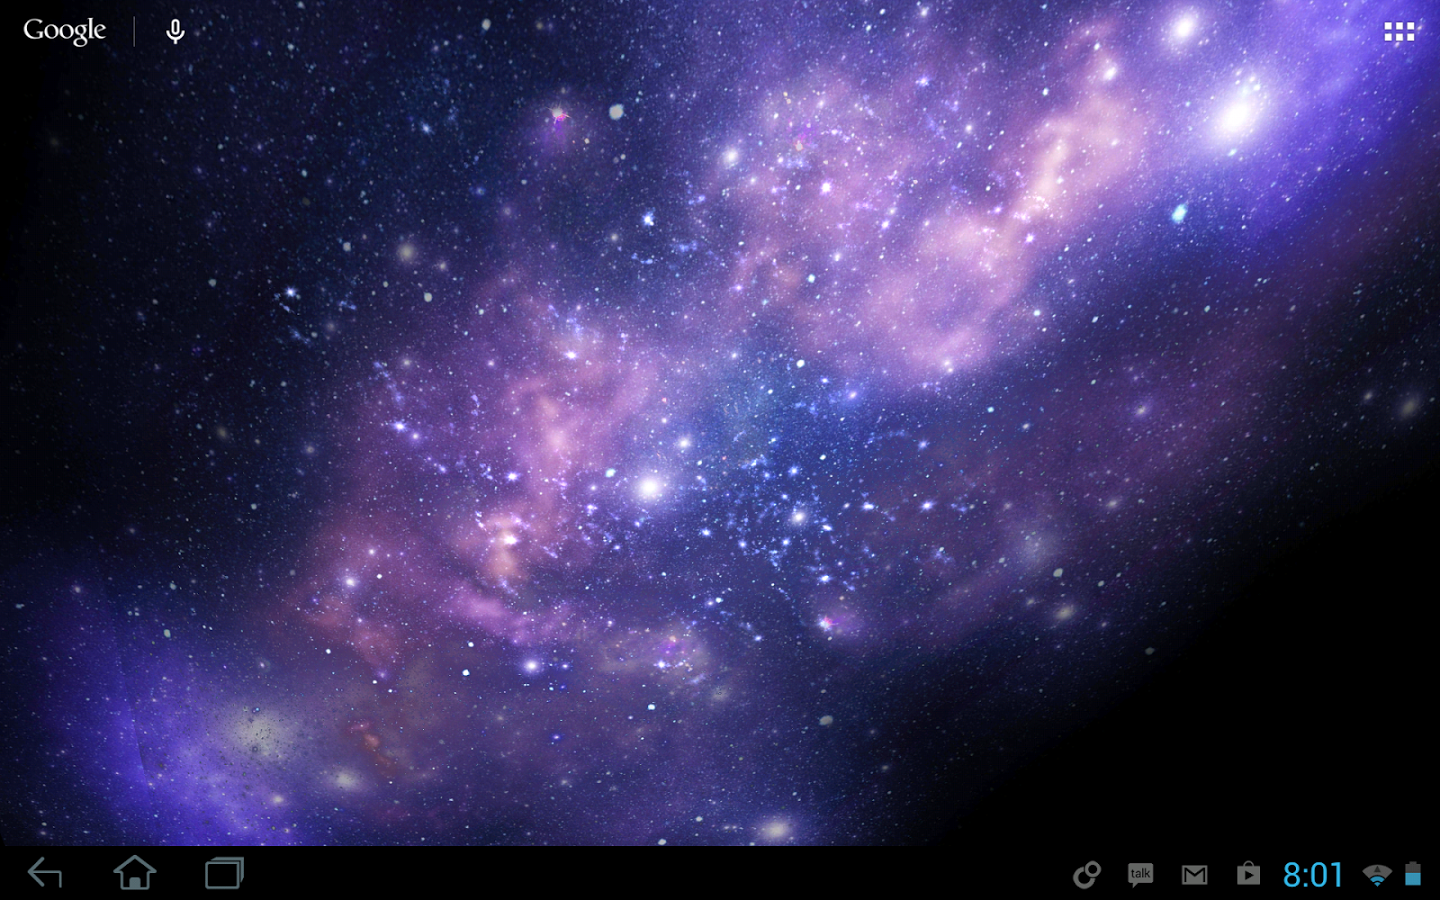 Stunning Live Wallpaper Featuring A Spinning Spiral Galaxy Galactic